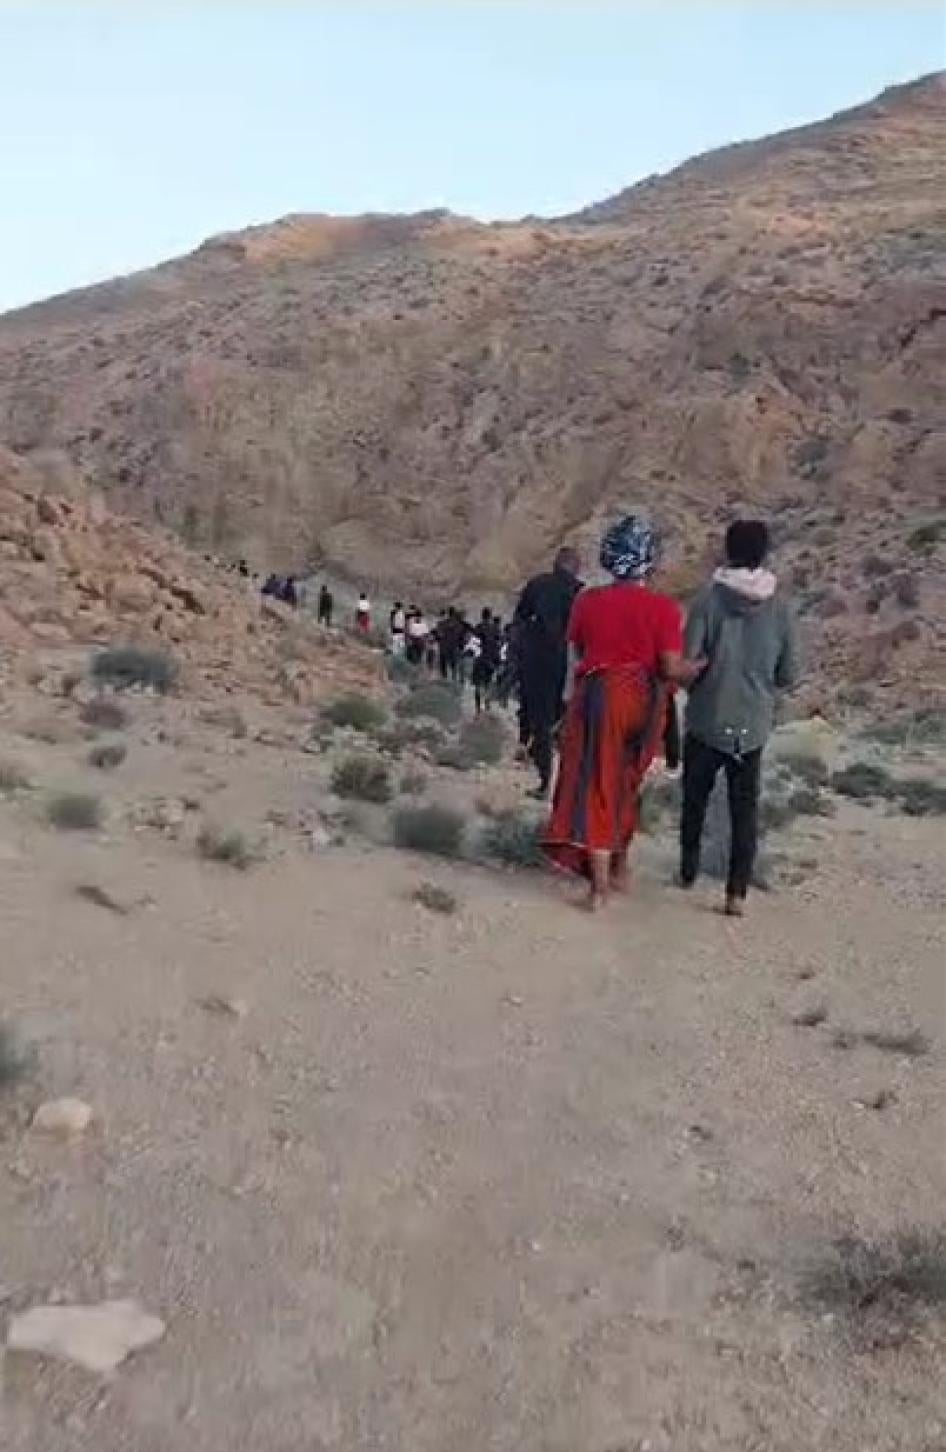 Black African migrants and asylum seekers walk in the desert near the Tunisia-Algeria border between July 5 and 7, 2023 after collective expulsion or forcible transfer there from Sfax, Tunisia, by Tunisian security forces. © 2023 Private